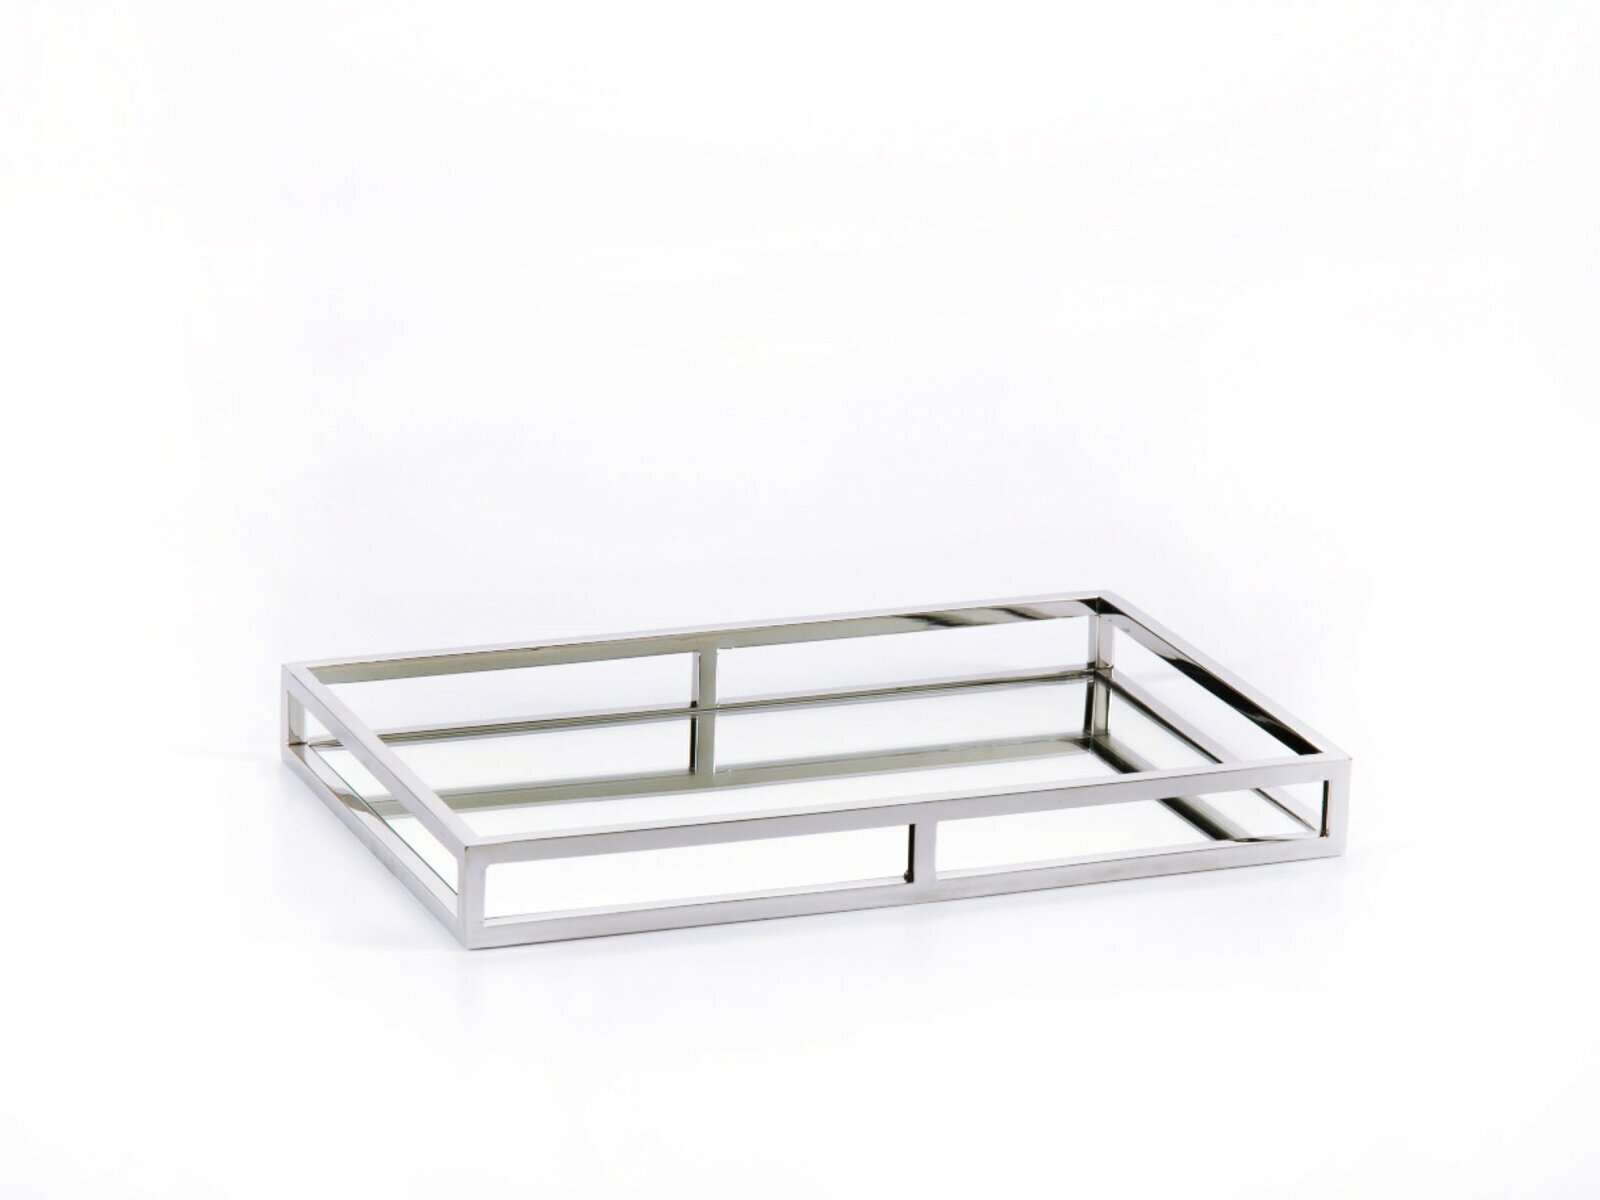 Stylish Large Mirrored Tray for Ottoman